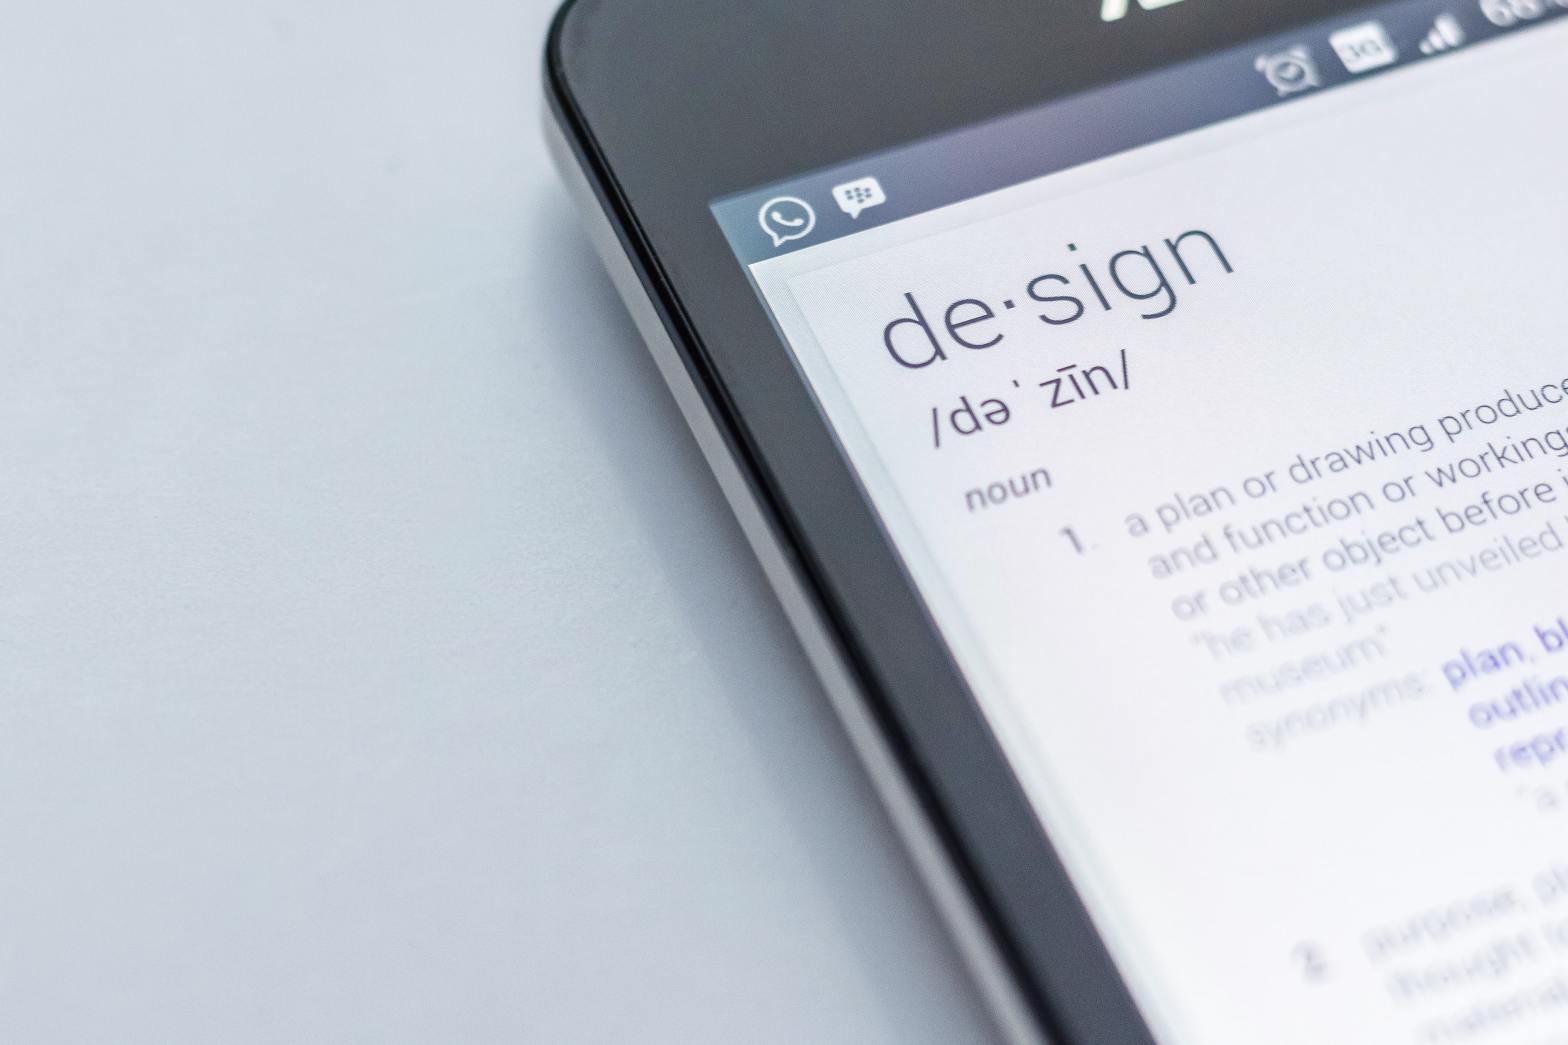 The UI vs. UX debate and the more holistic picture of human experience